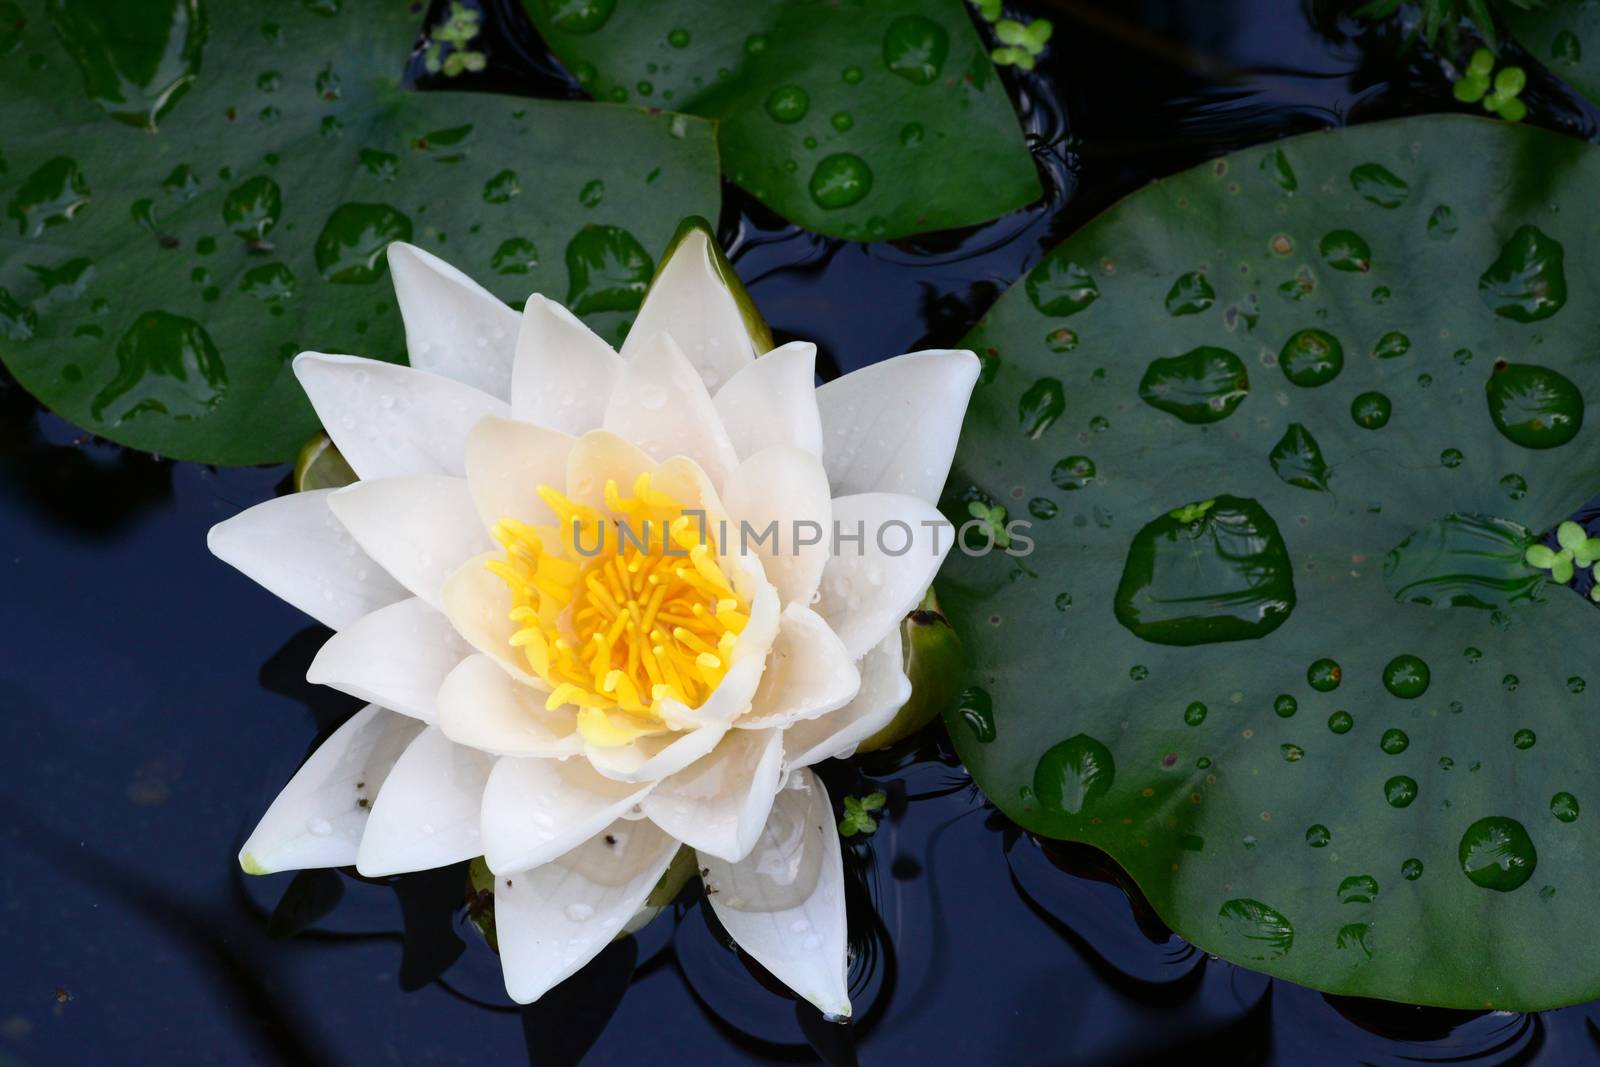 Photo of a white lily on the water. Nature photography. Taken in Germany, Babenhausen.